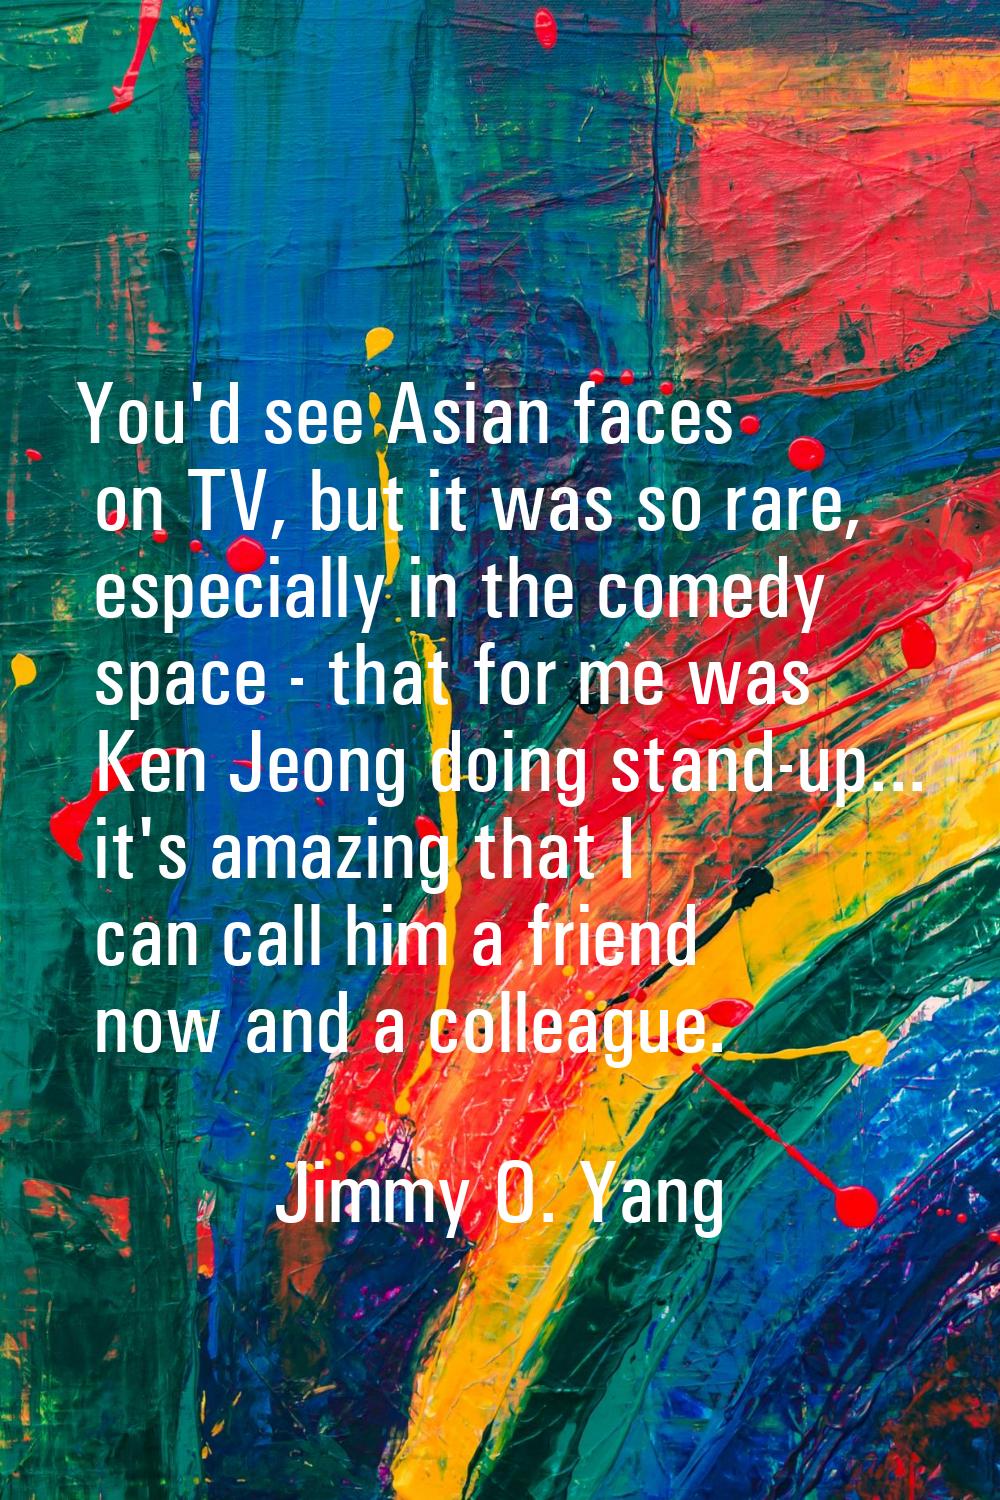 You'd see Asian faces on TV, but it was so rare, especially in the comedy space - that for me was K